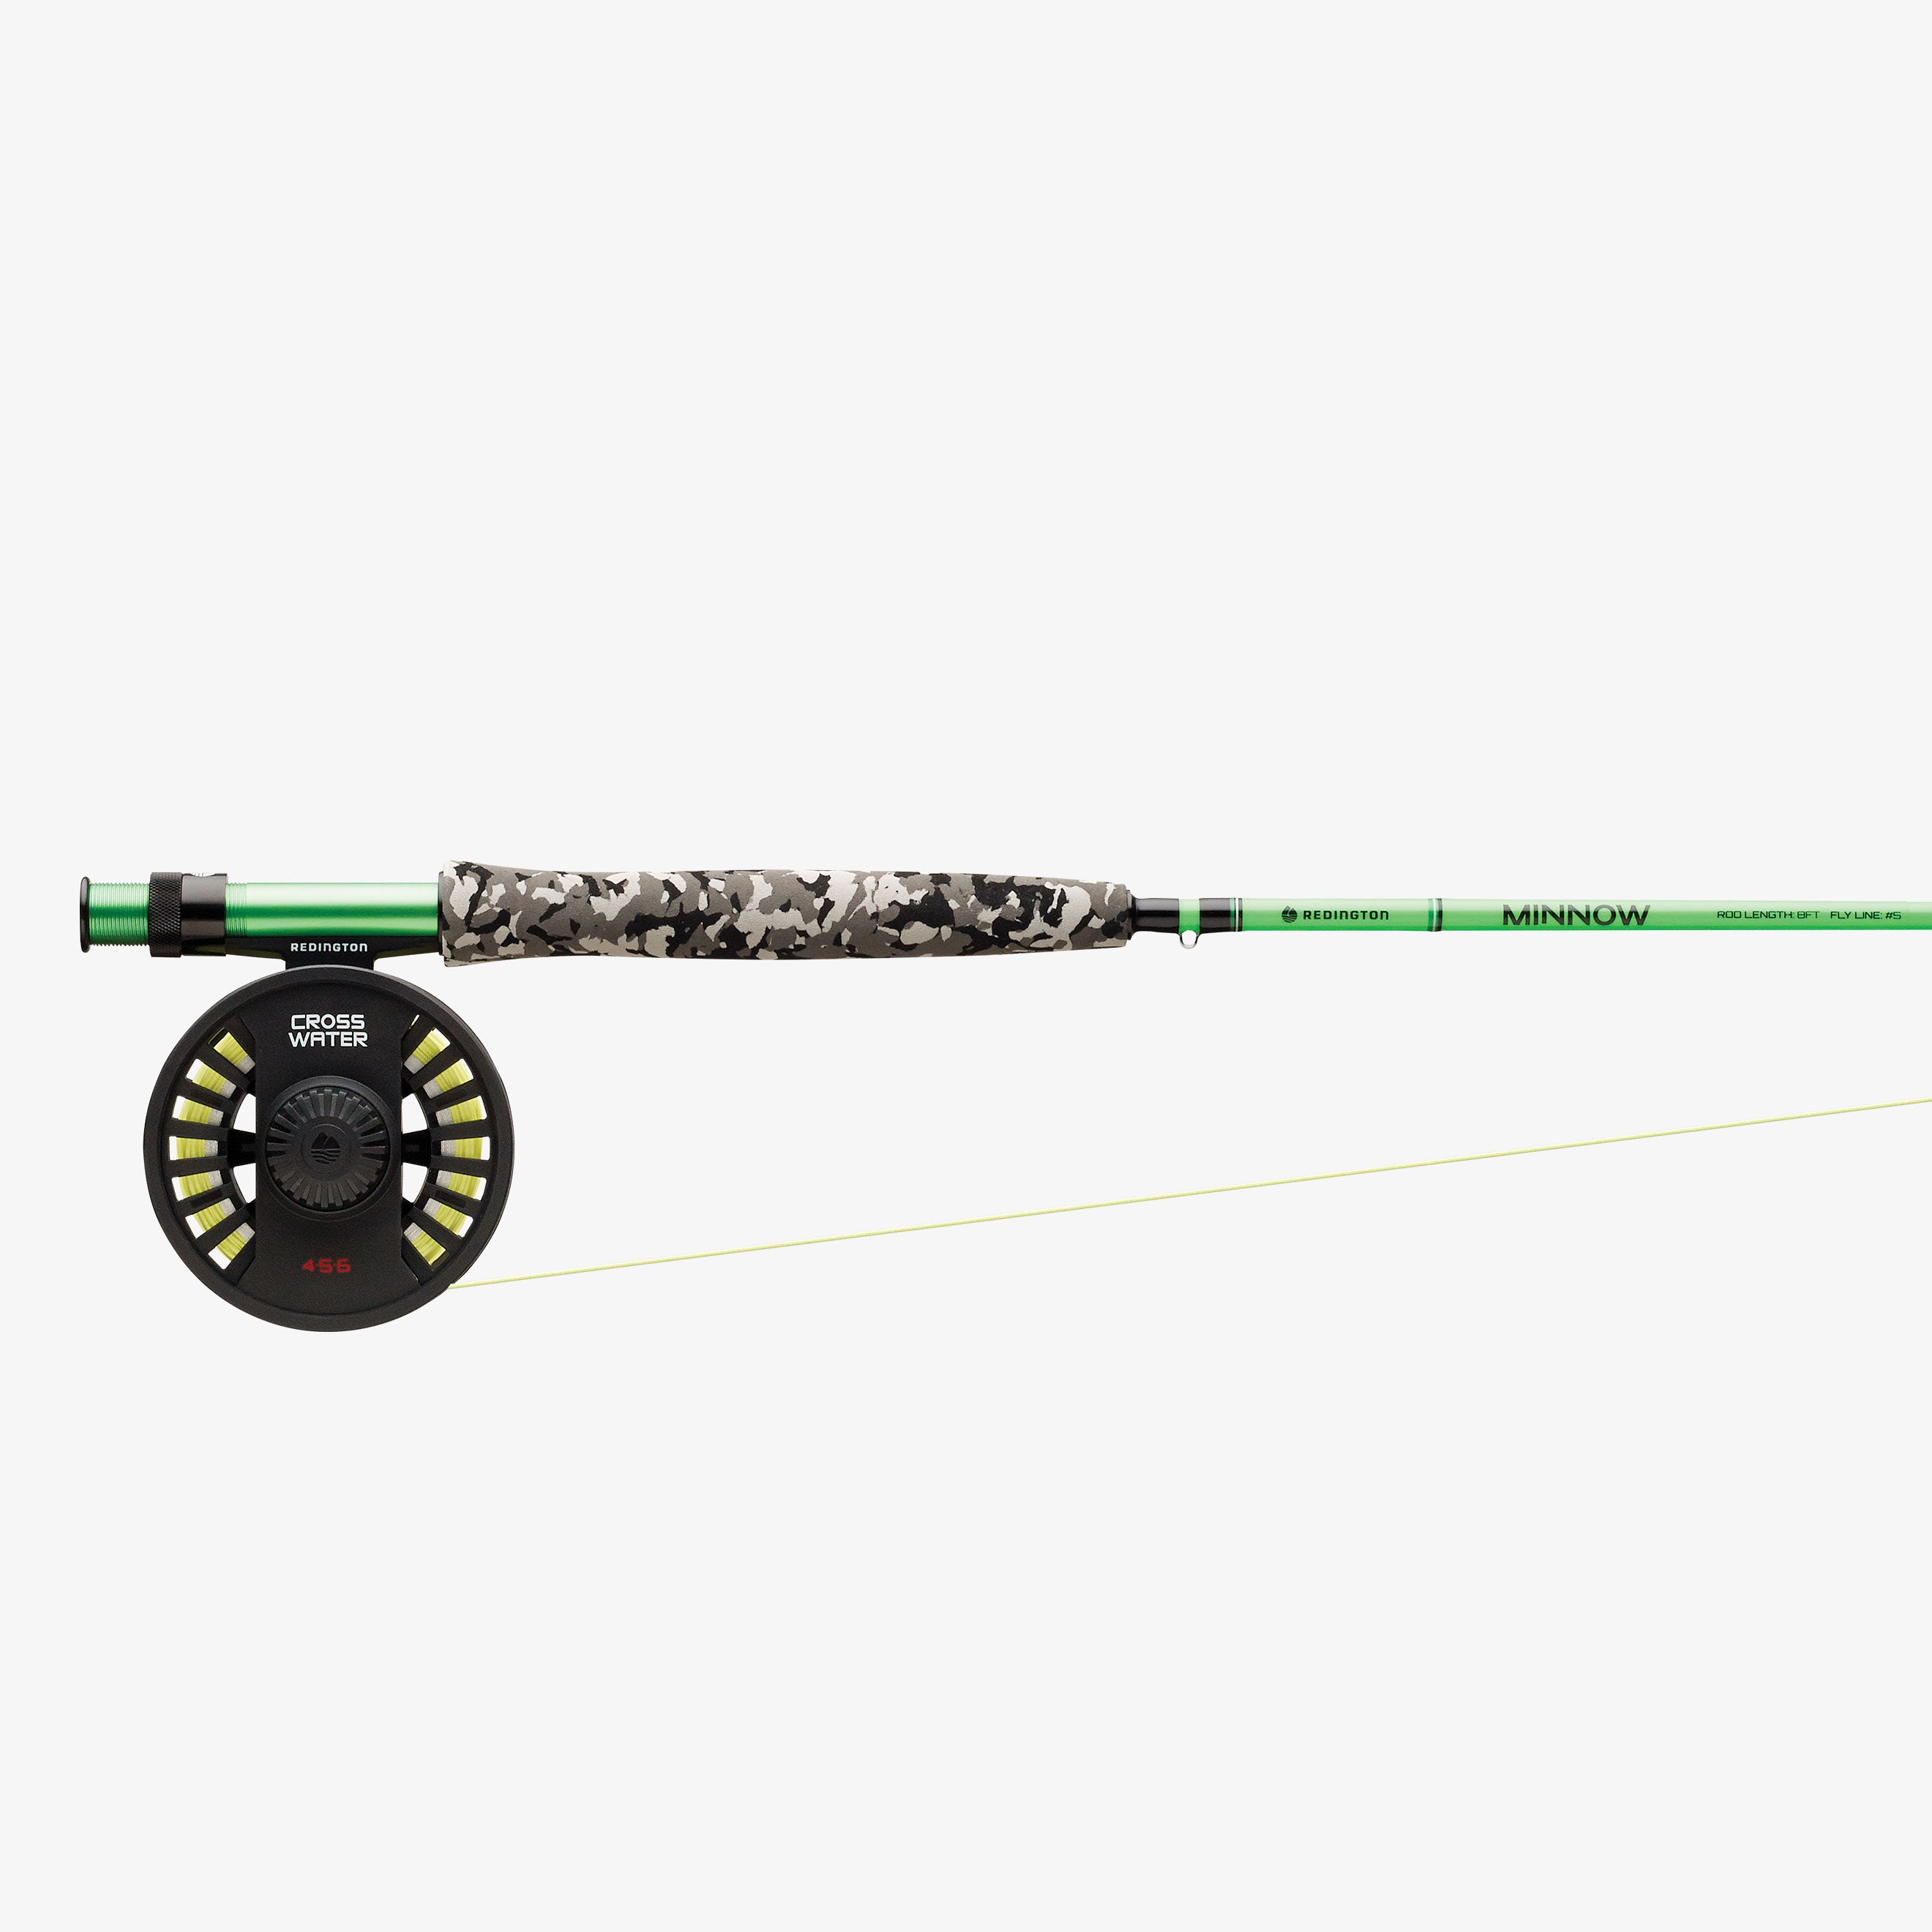 YOUTH MINNOW Fly Fishing Rod